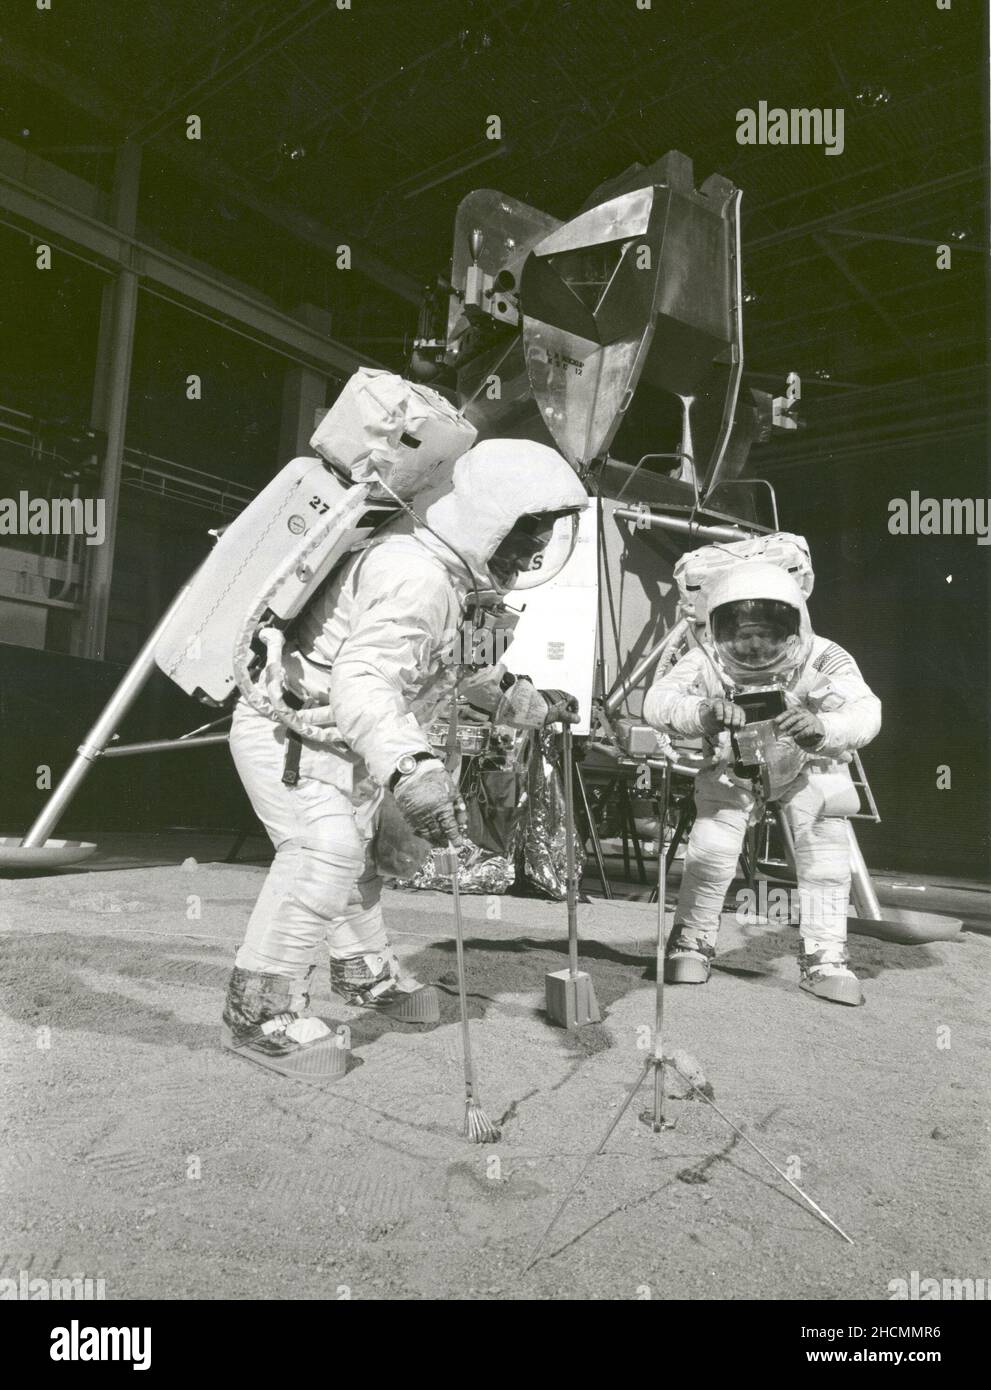 Two members of the Apollo 11 lunar landing mission participate in a simulation of deploying and using lunar tools on the surface of the Moon during a training exercise on April 22, 1969. Astronaut Buzz (Aldrin Jr. on left), lunar module pilot, uses a scoop and tongs to pick up a soil sample. Astronaut Neil A. Armstrong, Apollo 11 commander, holds a bag to receive the sample. In the background is a Lunar Module mockup. Stock Photo